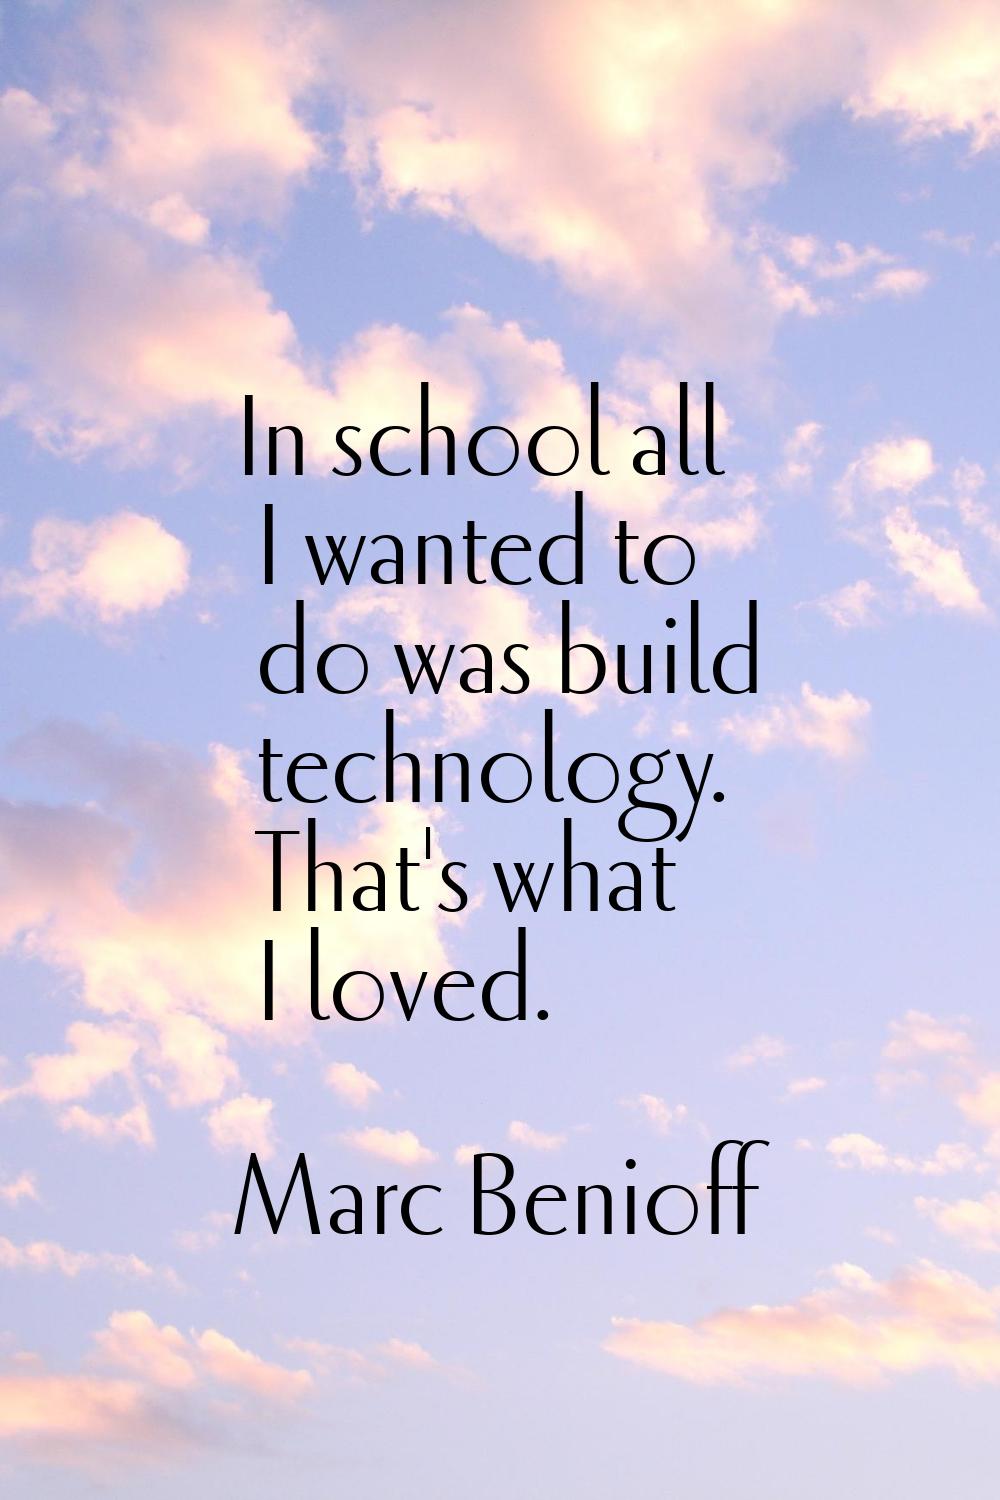 In school all I wanted to do was build technology. That's what I loved.